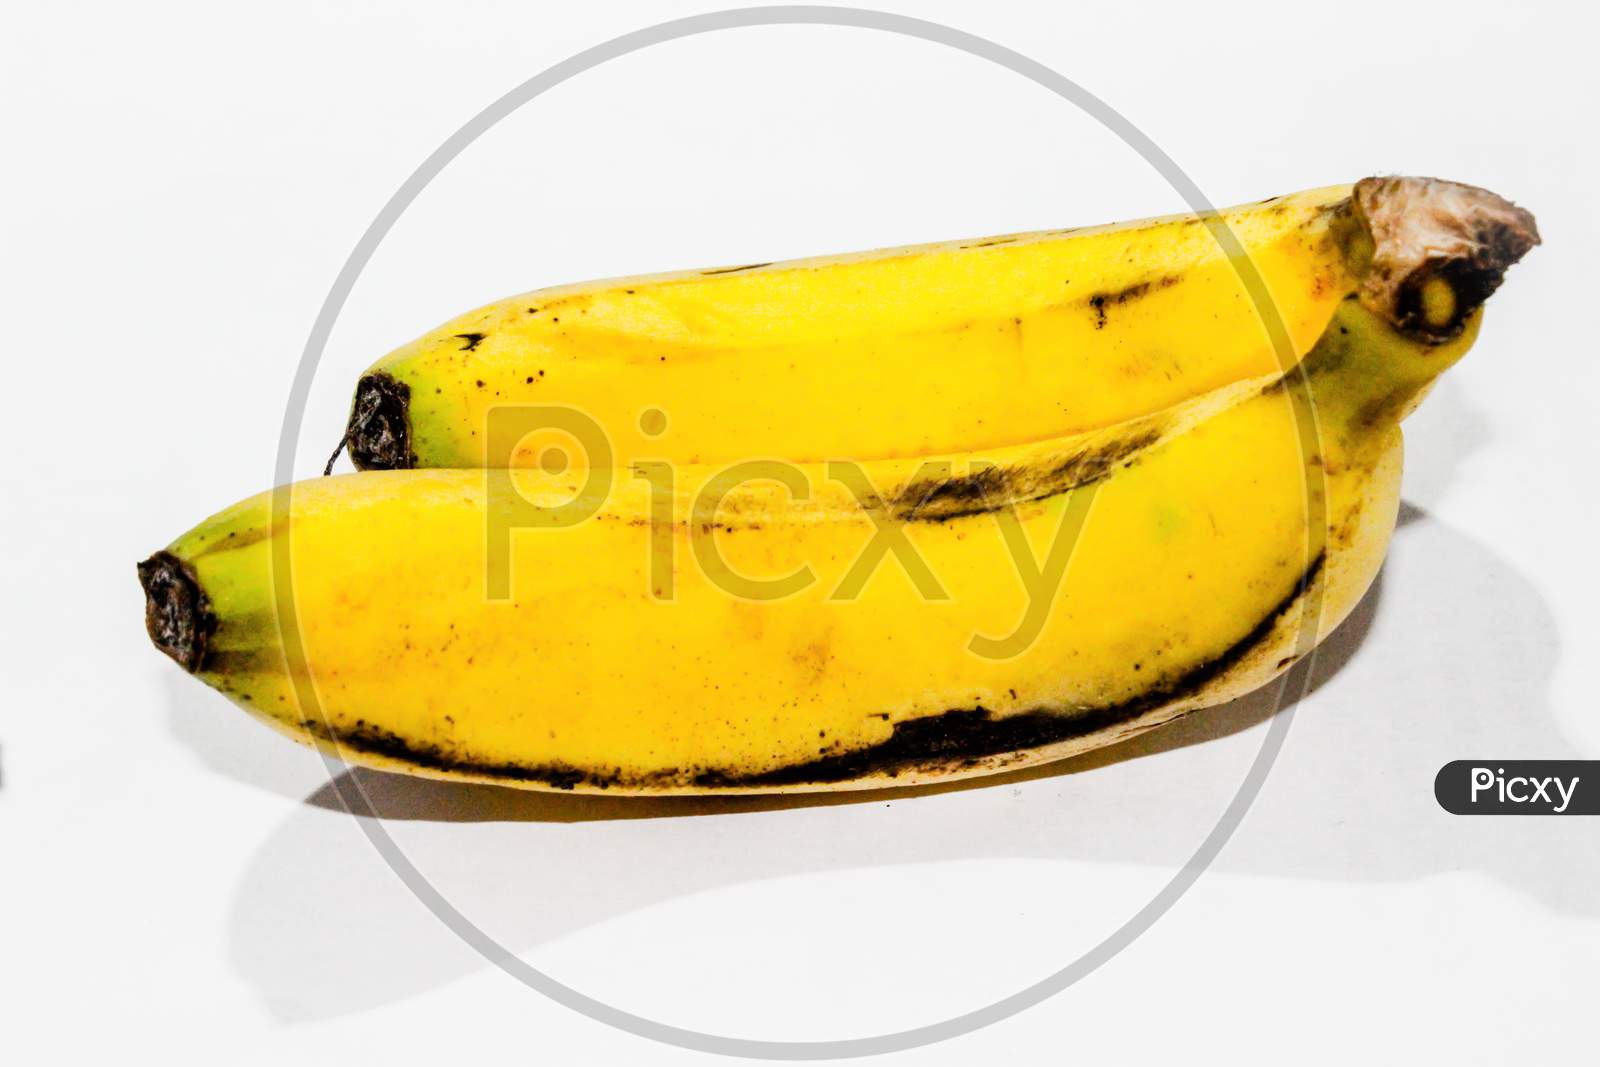 Bananas  Closeup Over an Isolated White Background